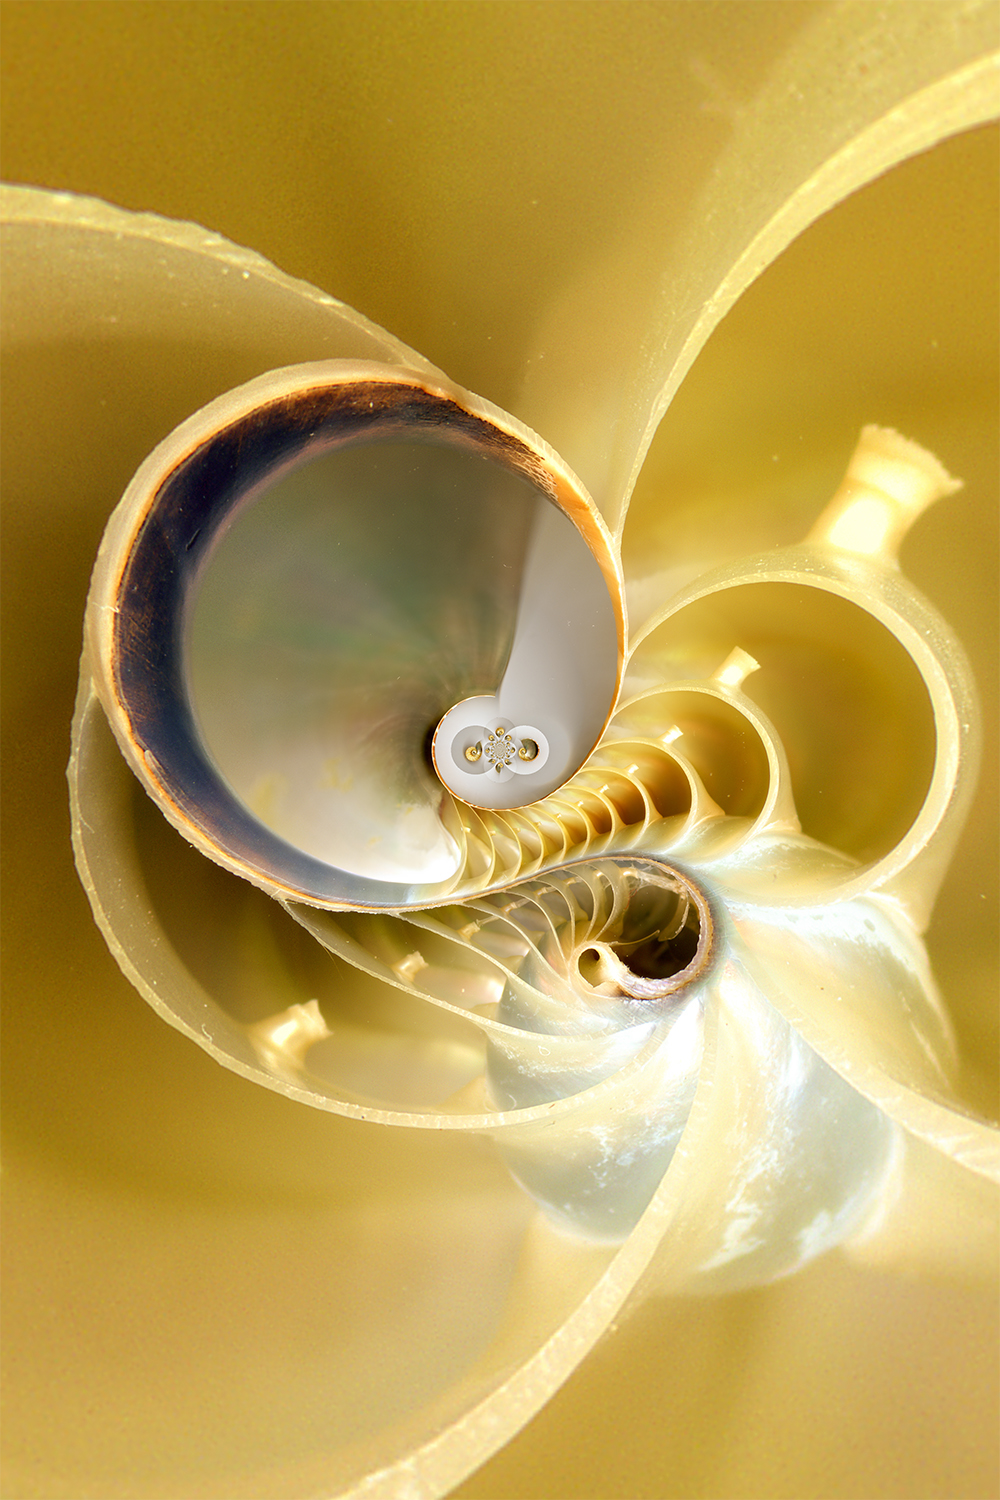 conformal transformational abstract Transformation nautilus shell picture window